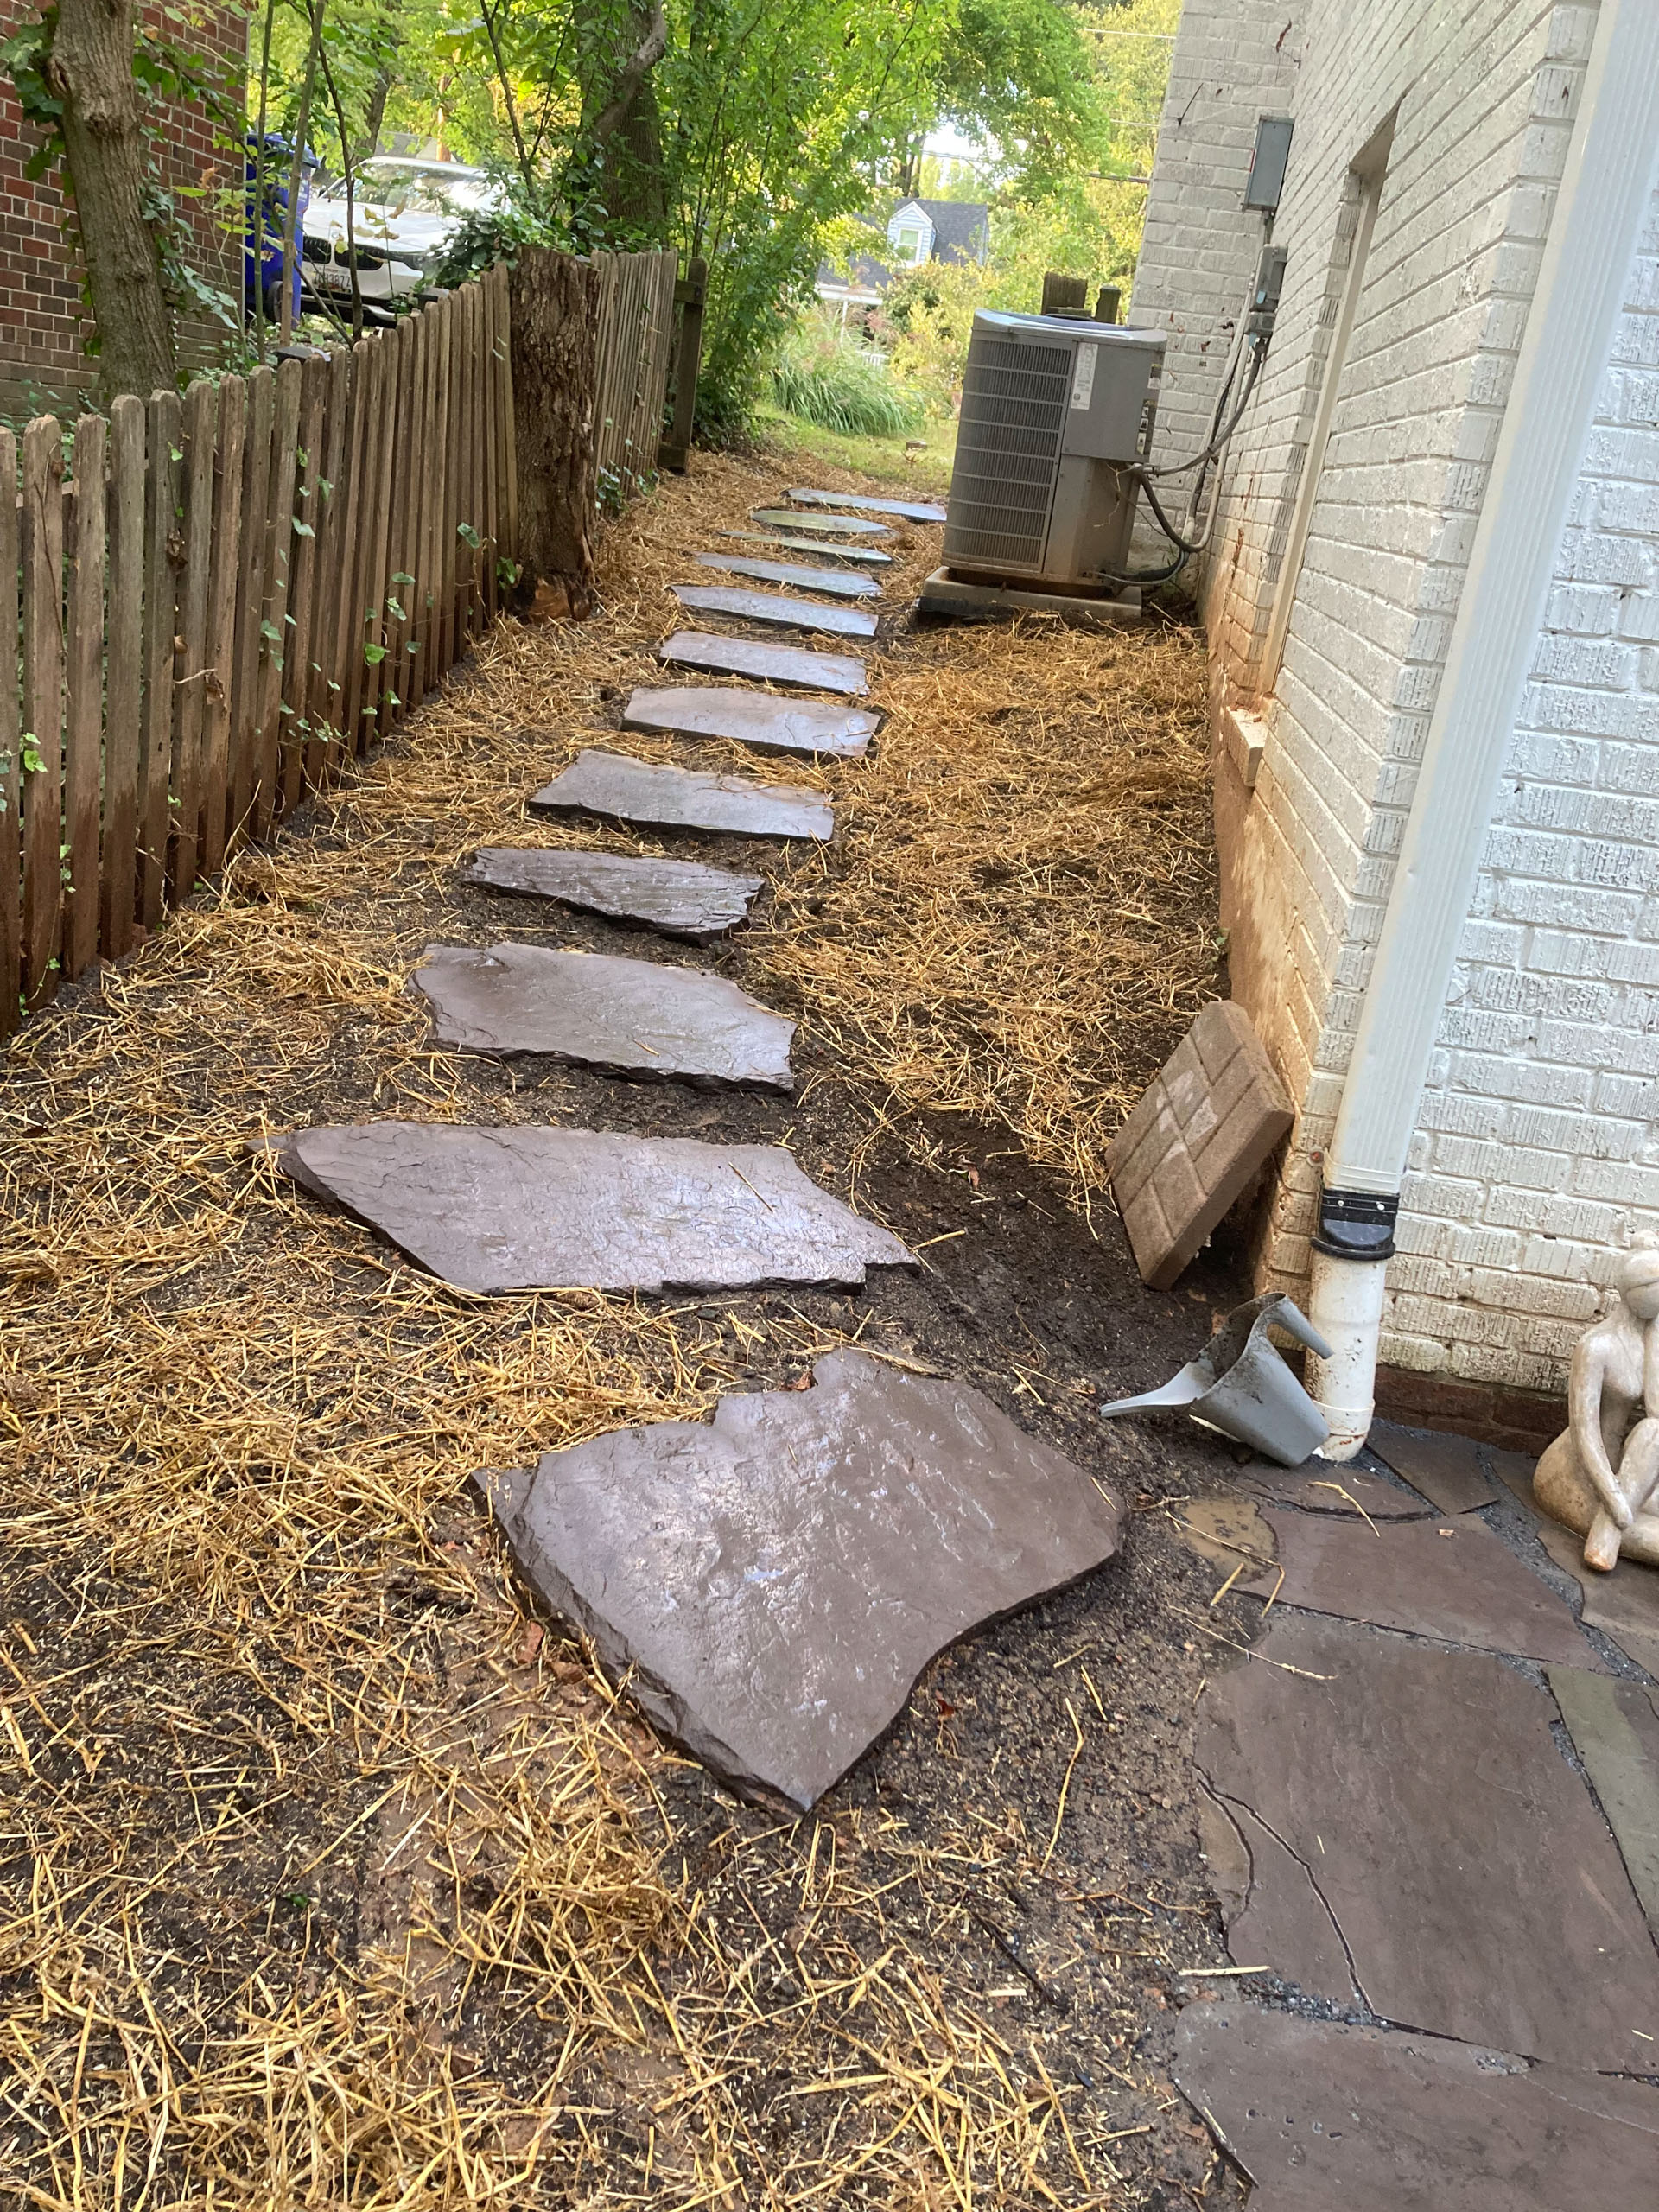 End result of a flagstone walkway built in Kensington, MD. Angle shows walkway meeting backyard patio.